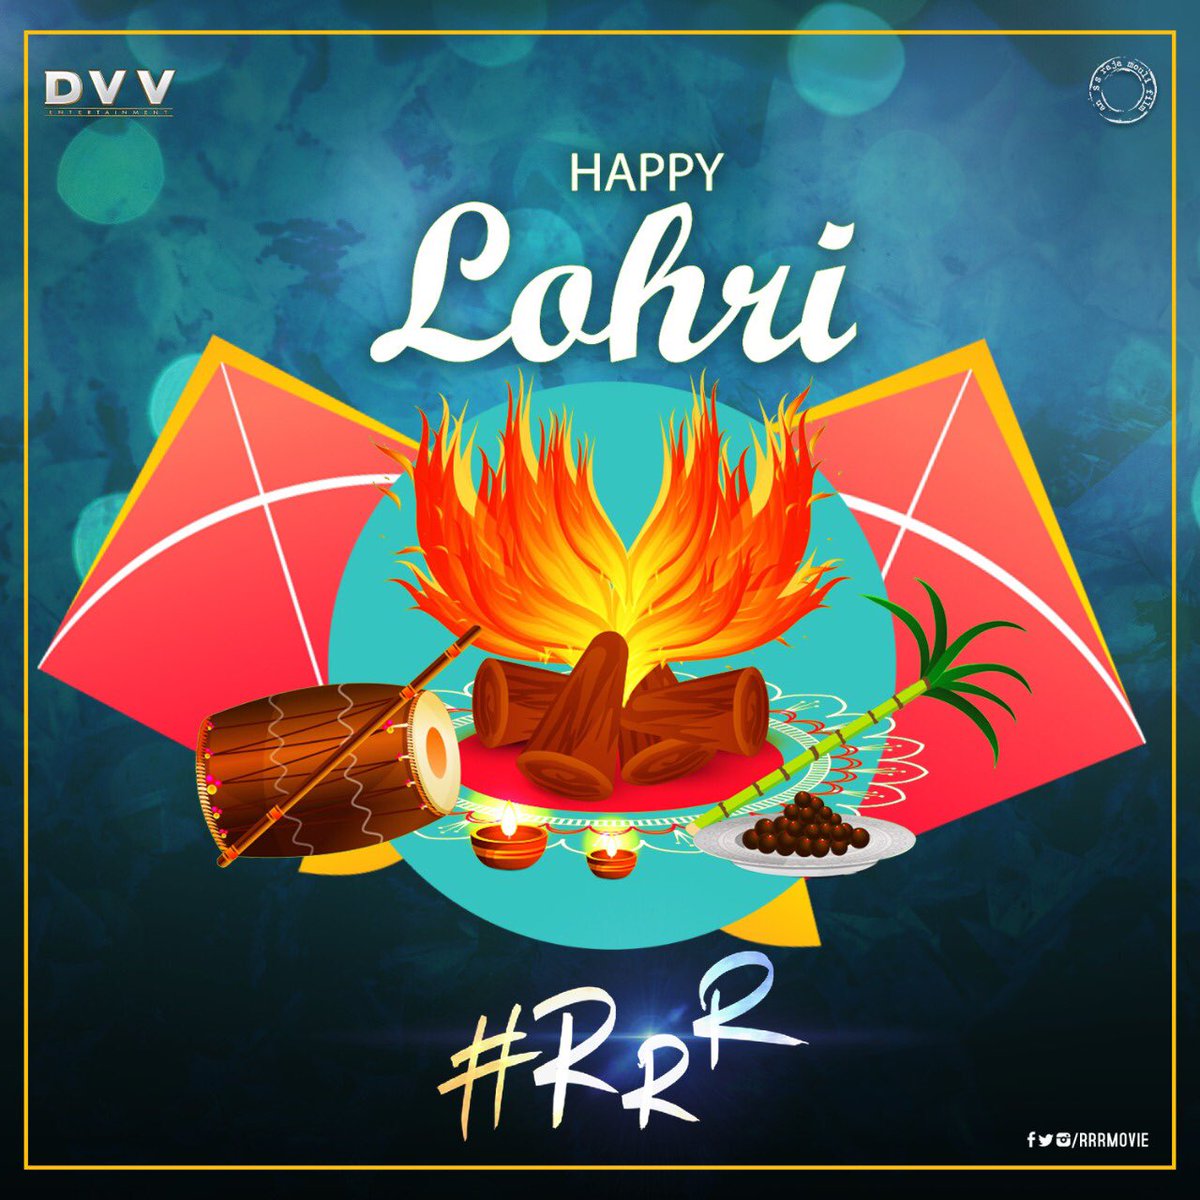 May the festival of #Lohri bring prosperity, happiness & warmth to you & your family.  #HappyLohri